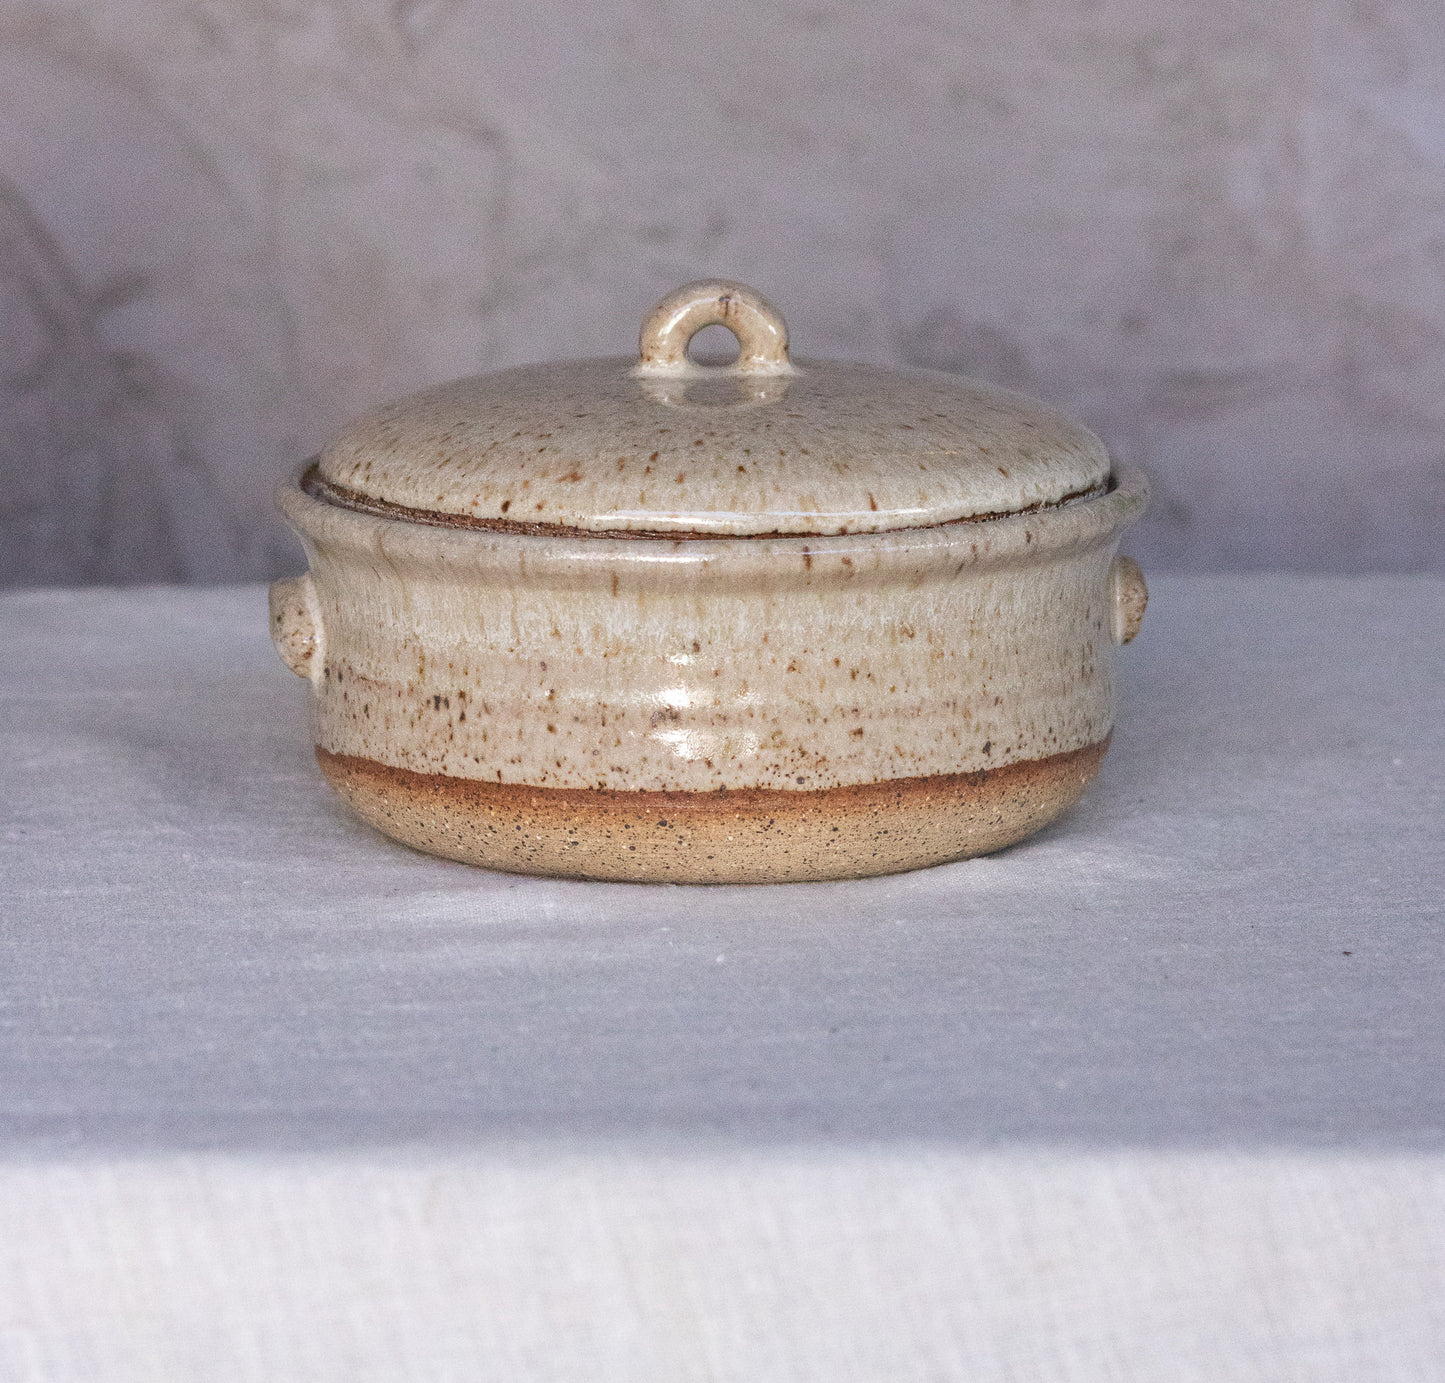 Melted Oat Compartment Salt or Spice Cellar